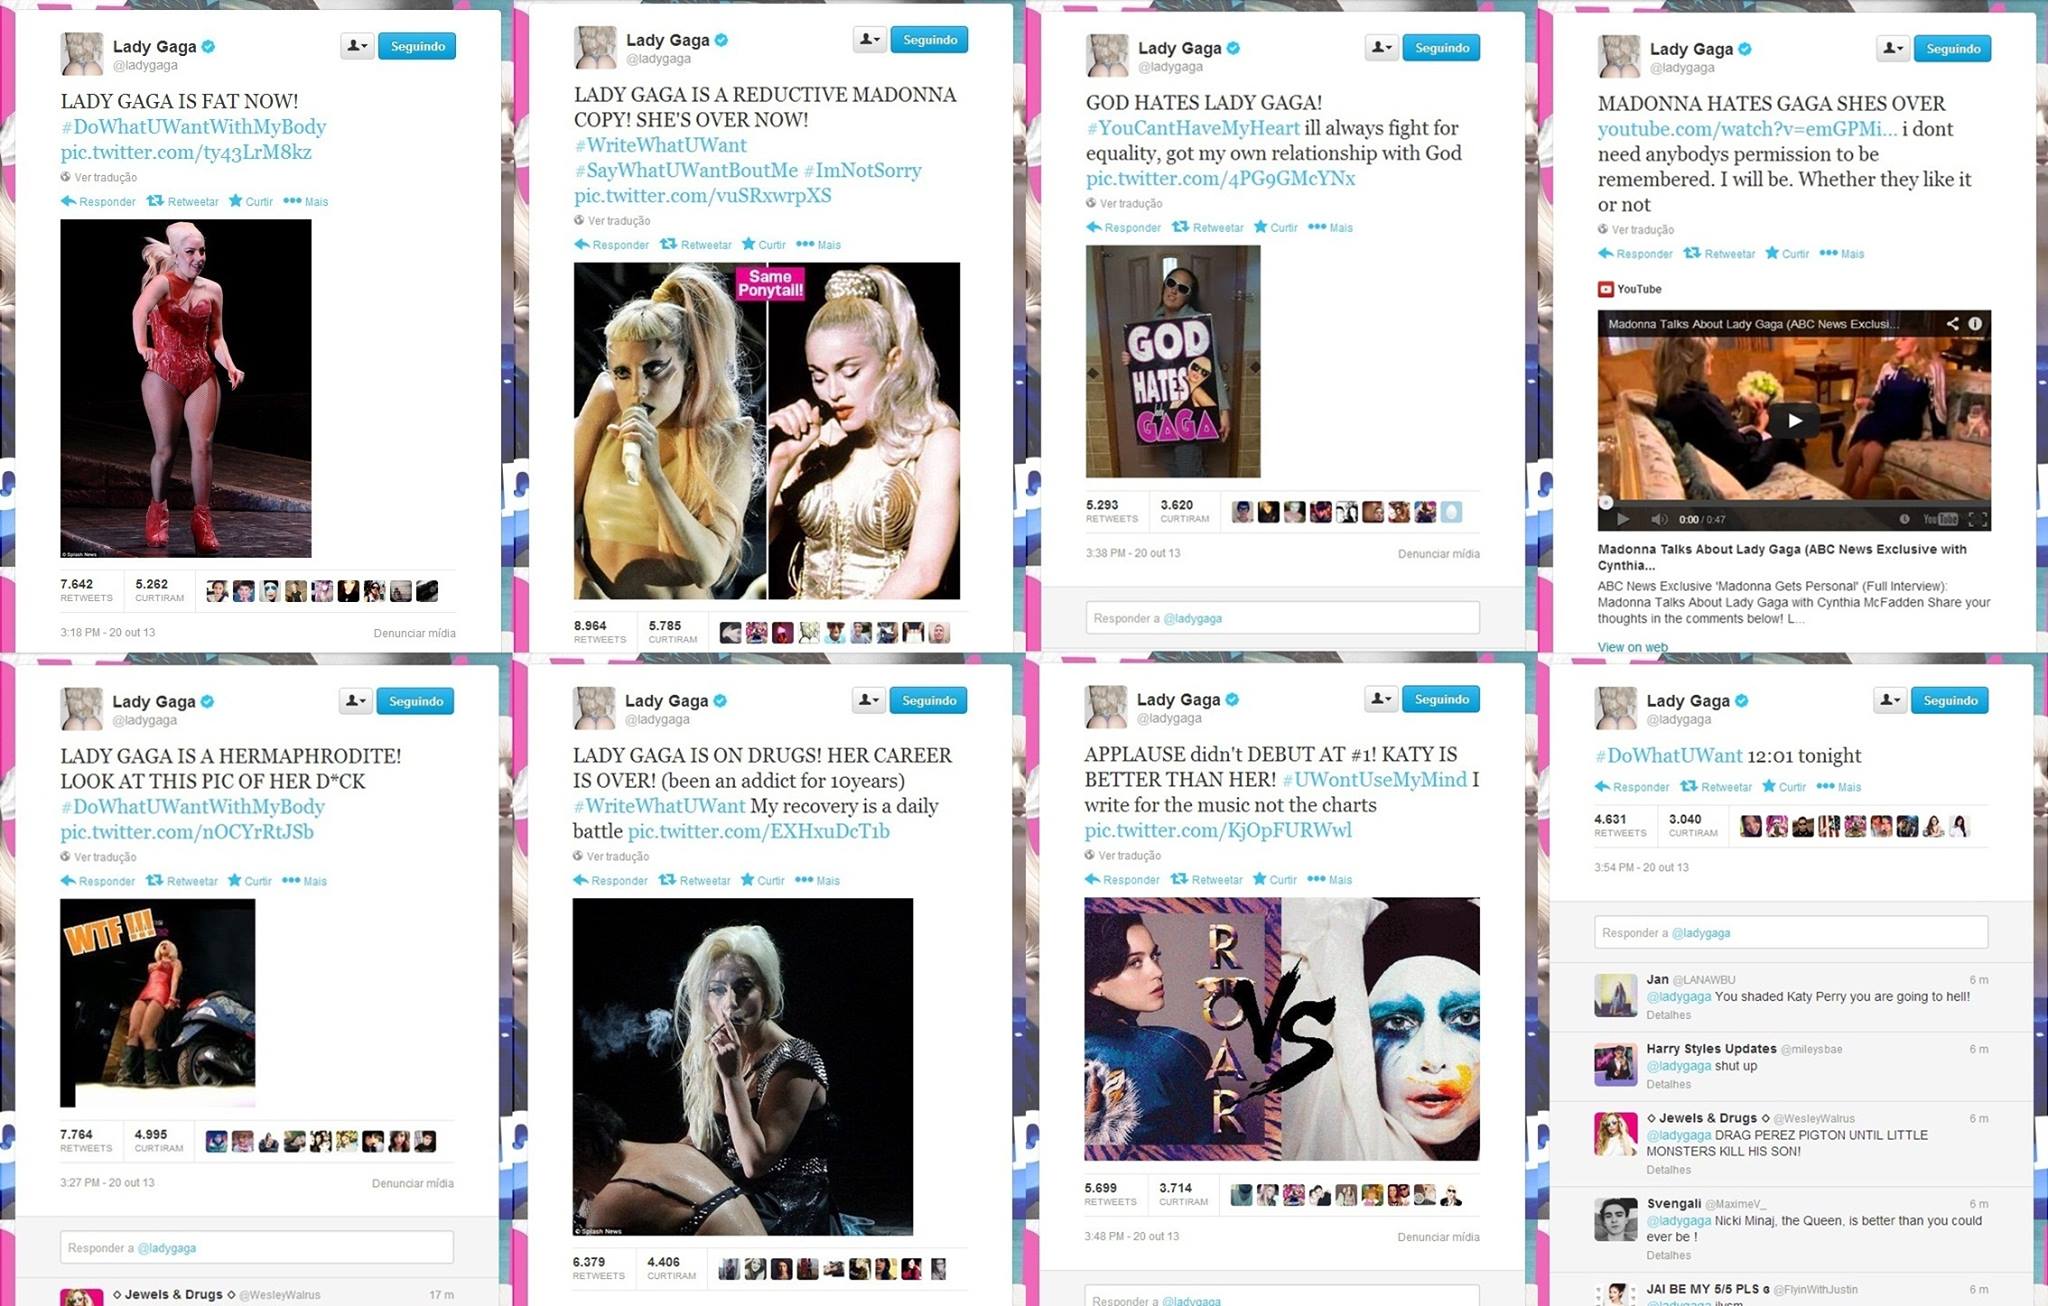 lady gaga about madonna e katy perry no twitter2